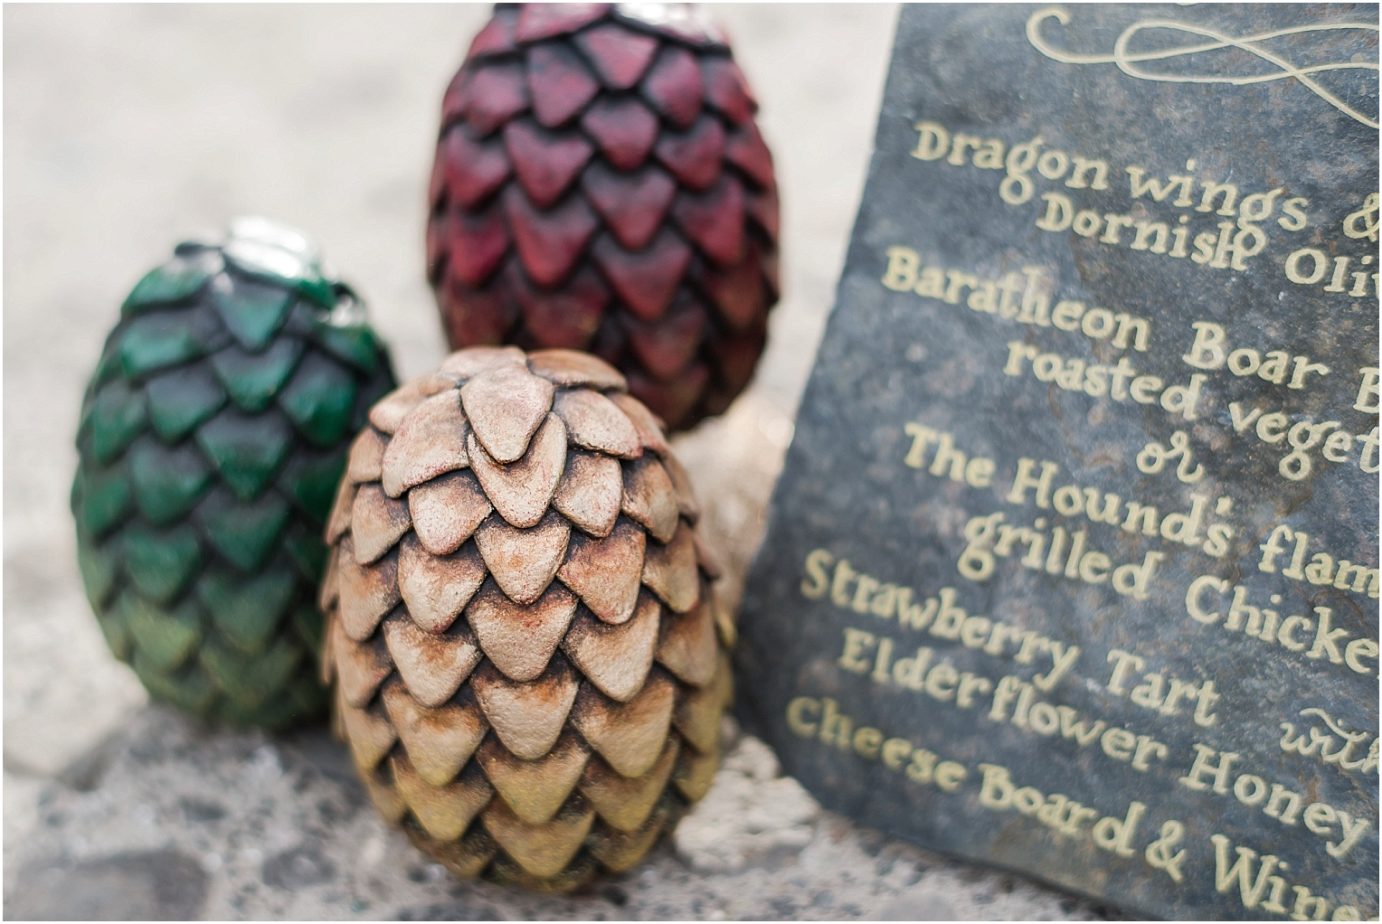 Game of Thrones wedding inspiration Goldendale WA Styled Shoot dragon eggs and menu